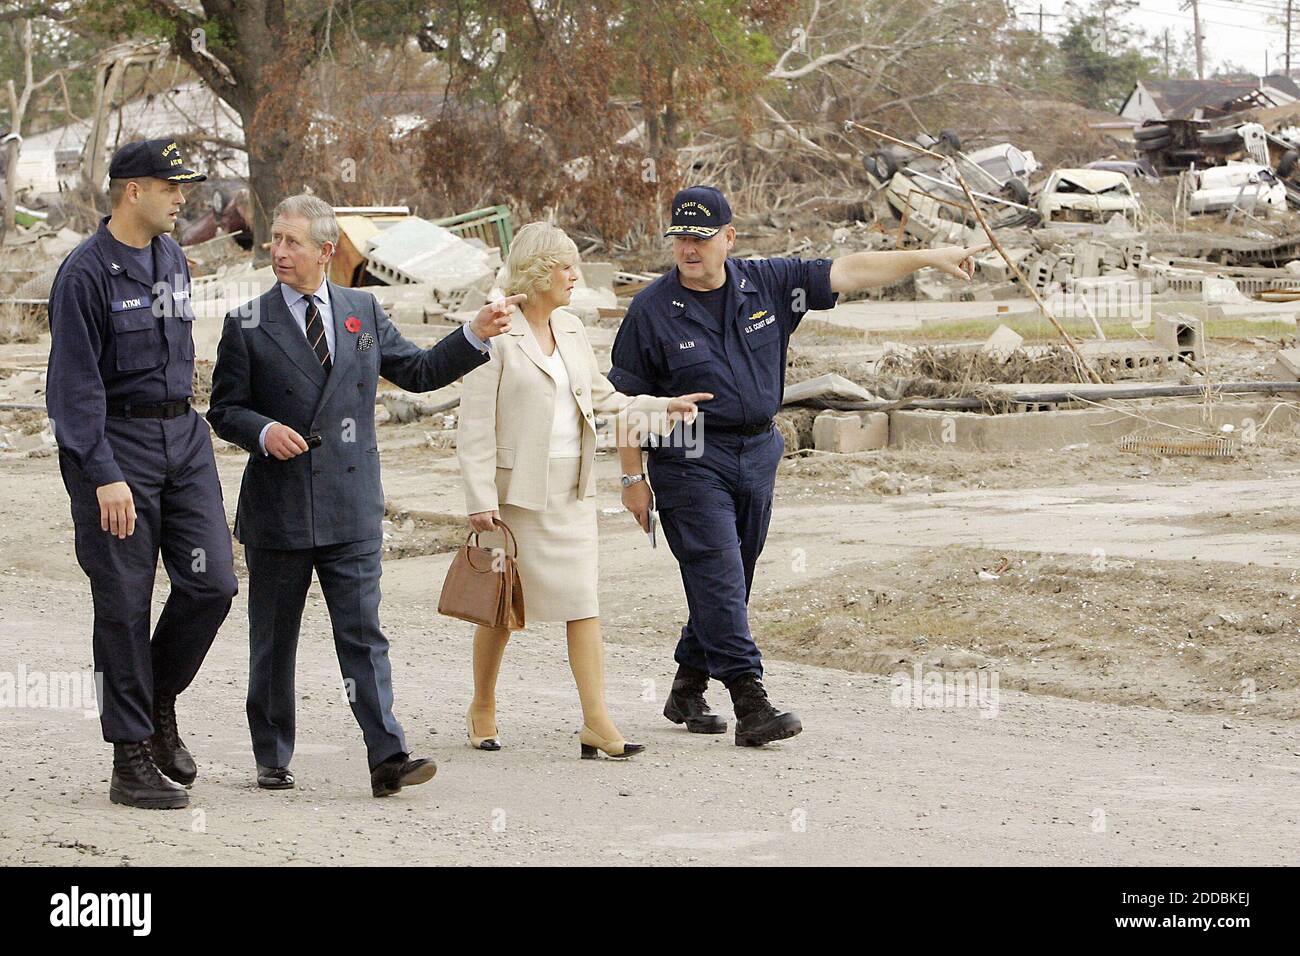 NO FILM, NO VIDEO, NO TV, NO DOCUMENTARY - Prince Charles and his wife, Camilla, Duchess of Cornwall, made a visit to the Lower 9th Ward in New Orleans, Louisiana, near the Industrial Canal levee on Friday, November 4, 2005, to see Hurricane Katrina's damage. Britain's Prince Charles talks with United States Coast Guard Captain Tom Atkin as his wife Camilla, Duchess of Cornwall, speaks with Coast Guard Vice Admiral Thad Allen. Photo by Chris Oberholtz/Kansas City Star/KRT/ABACAPRESS.COM Stock Photo